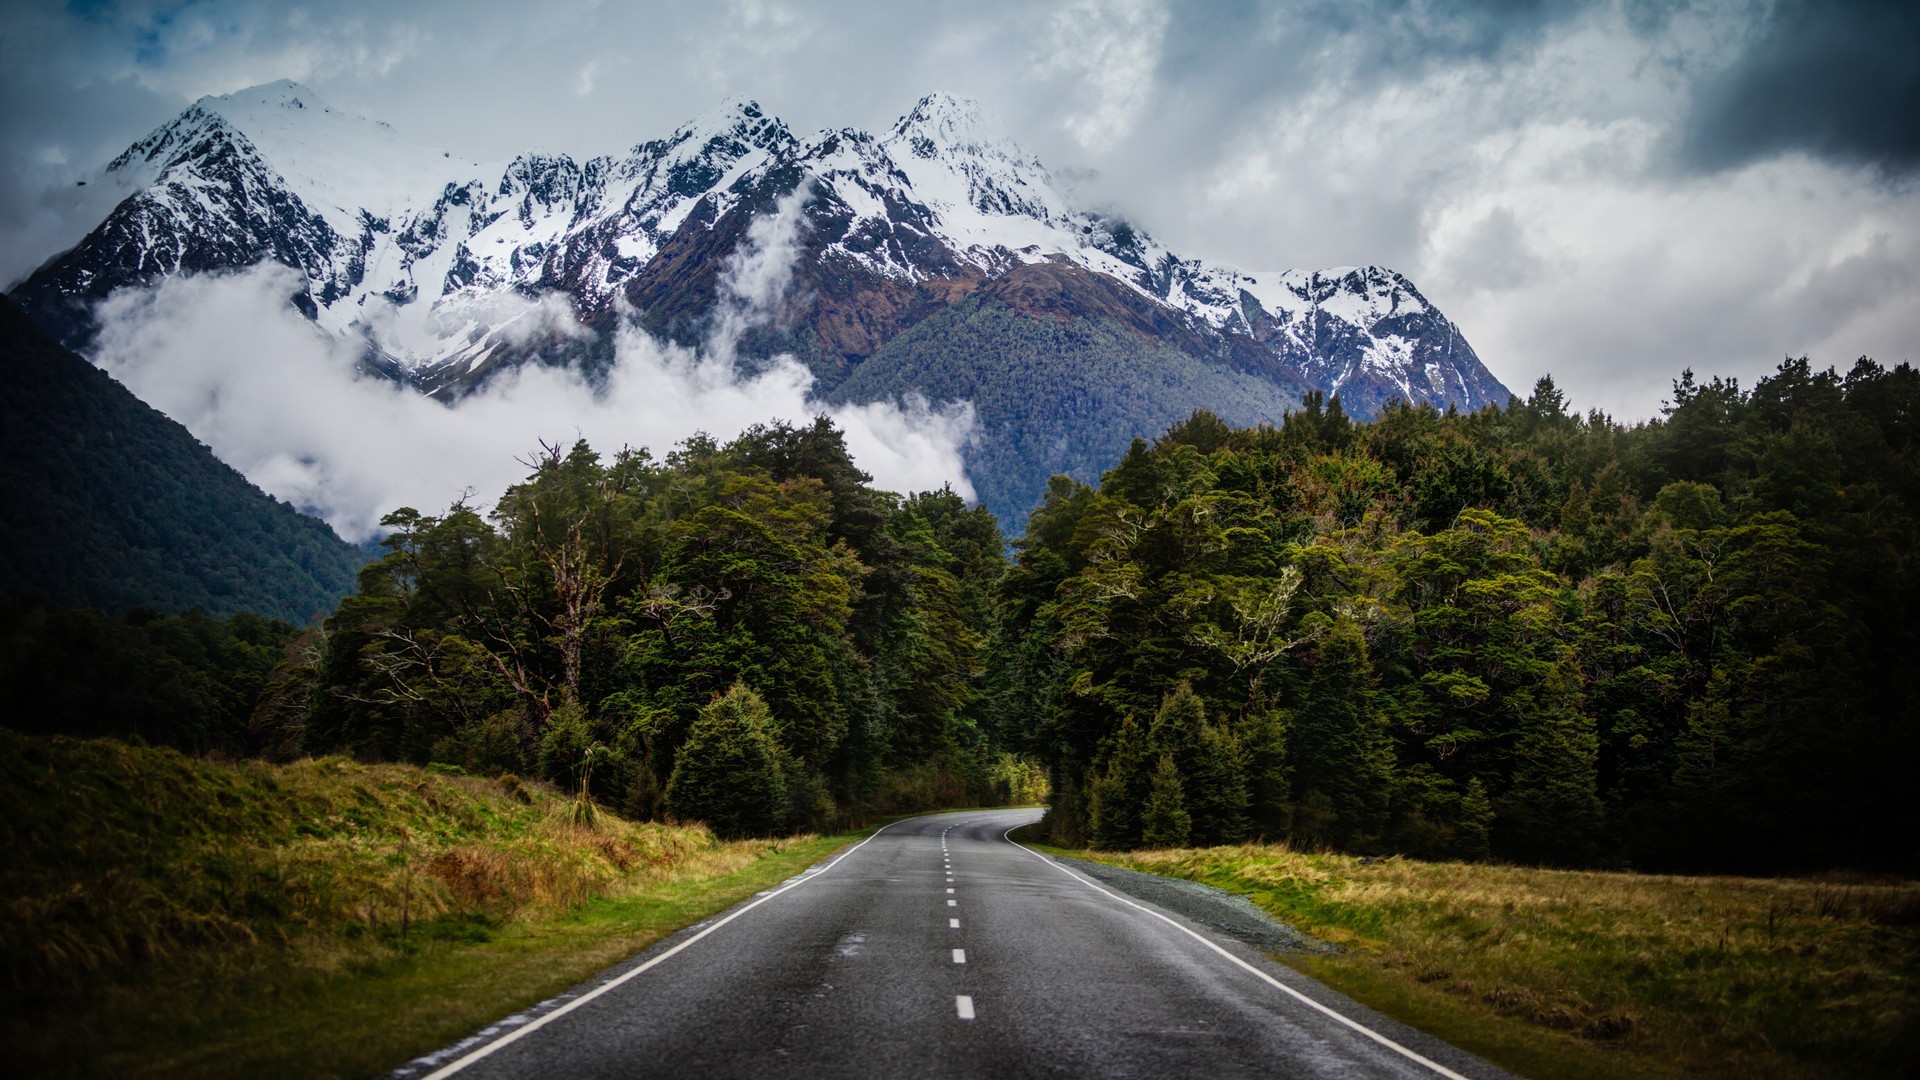 General 1920x1080 HDR nature landscape mountains road New Zealand